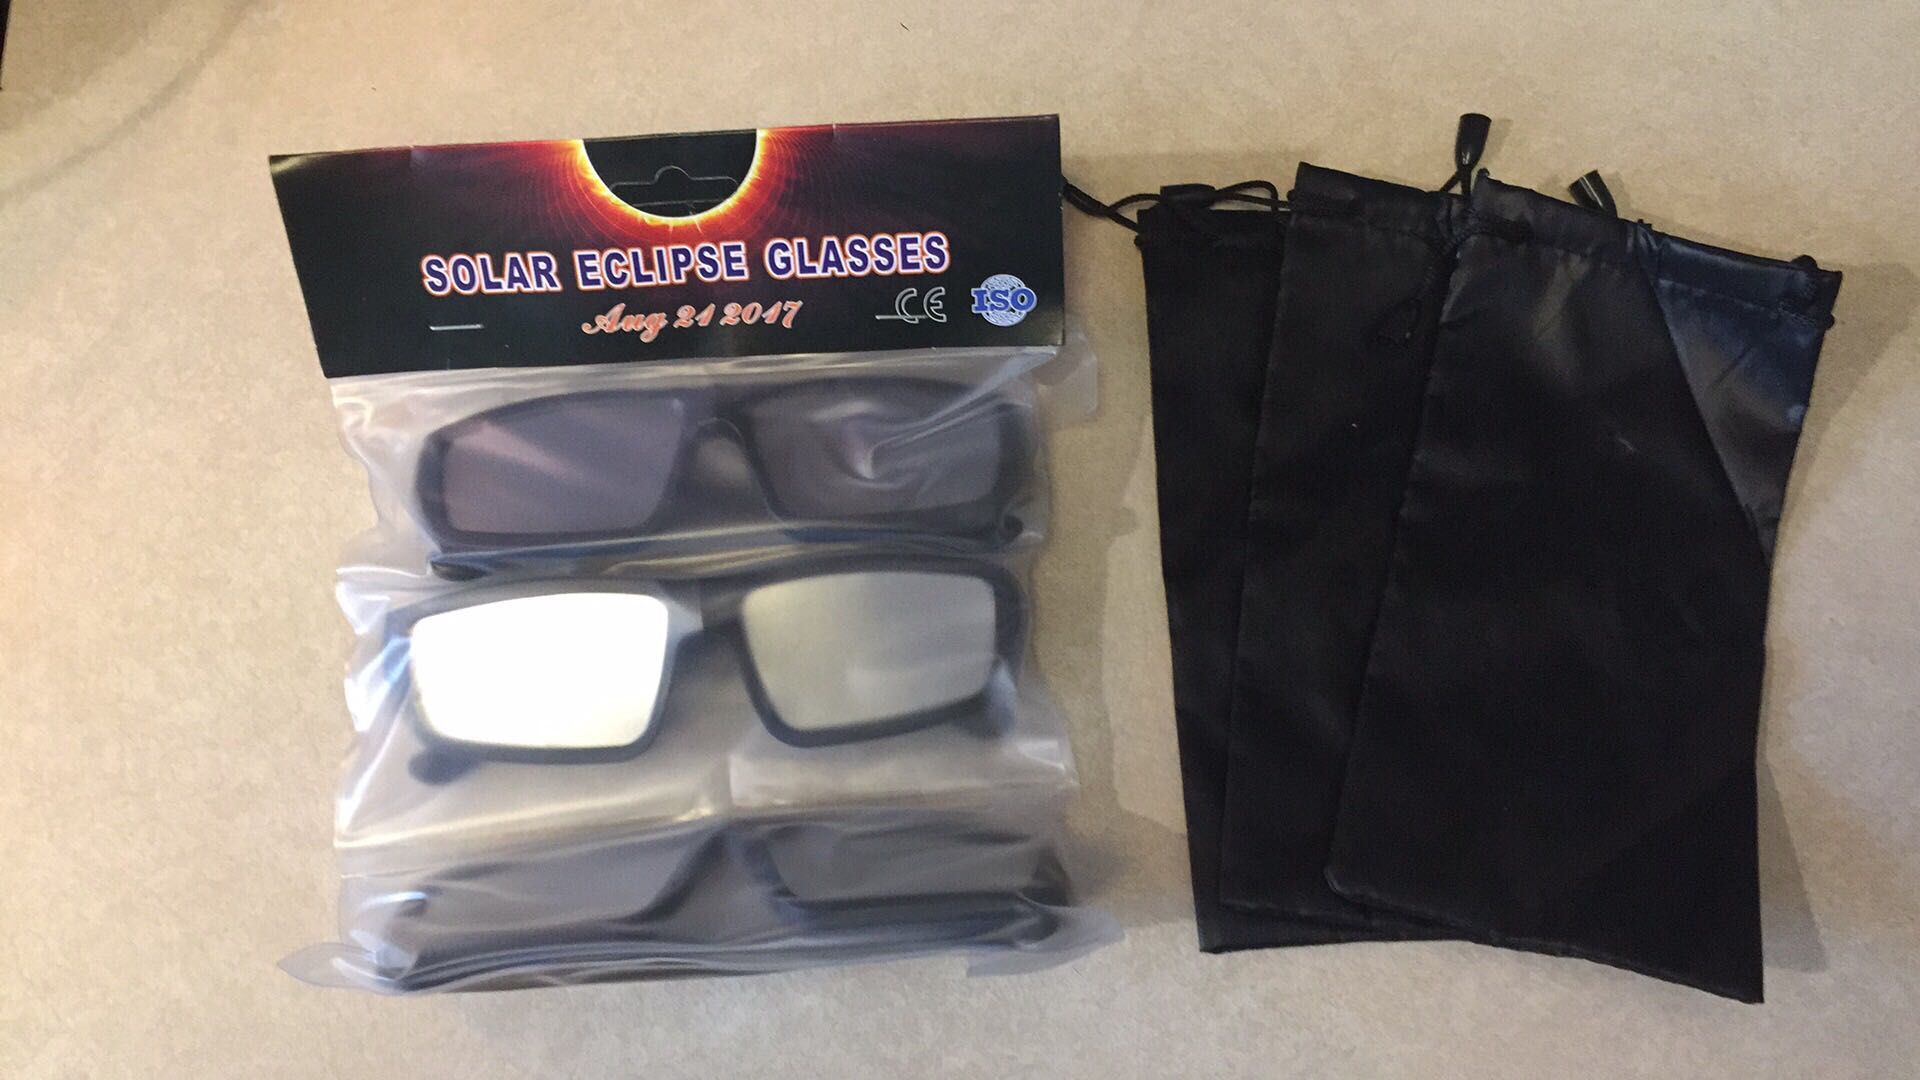 Good news, everybody! The solar eclipse glasses I ordered a month ago finally came!